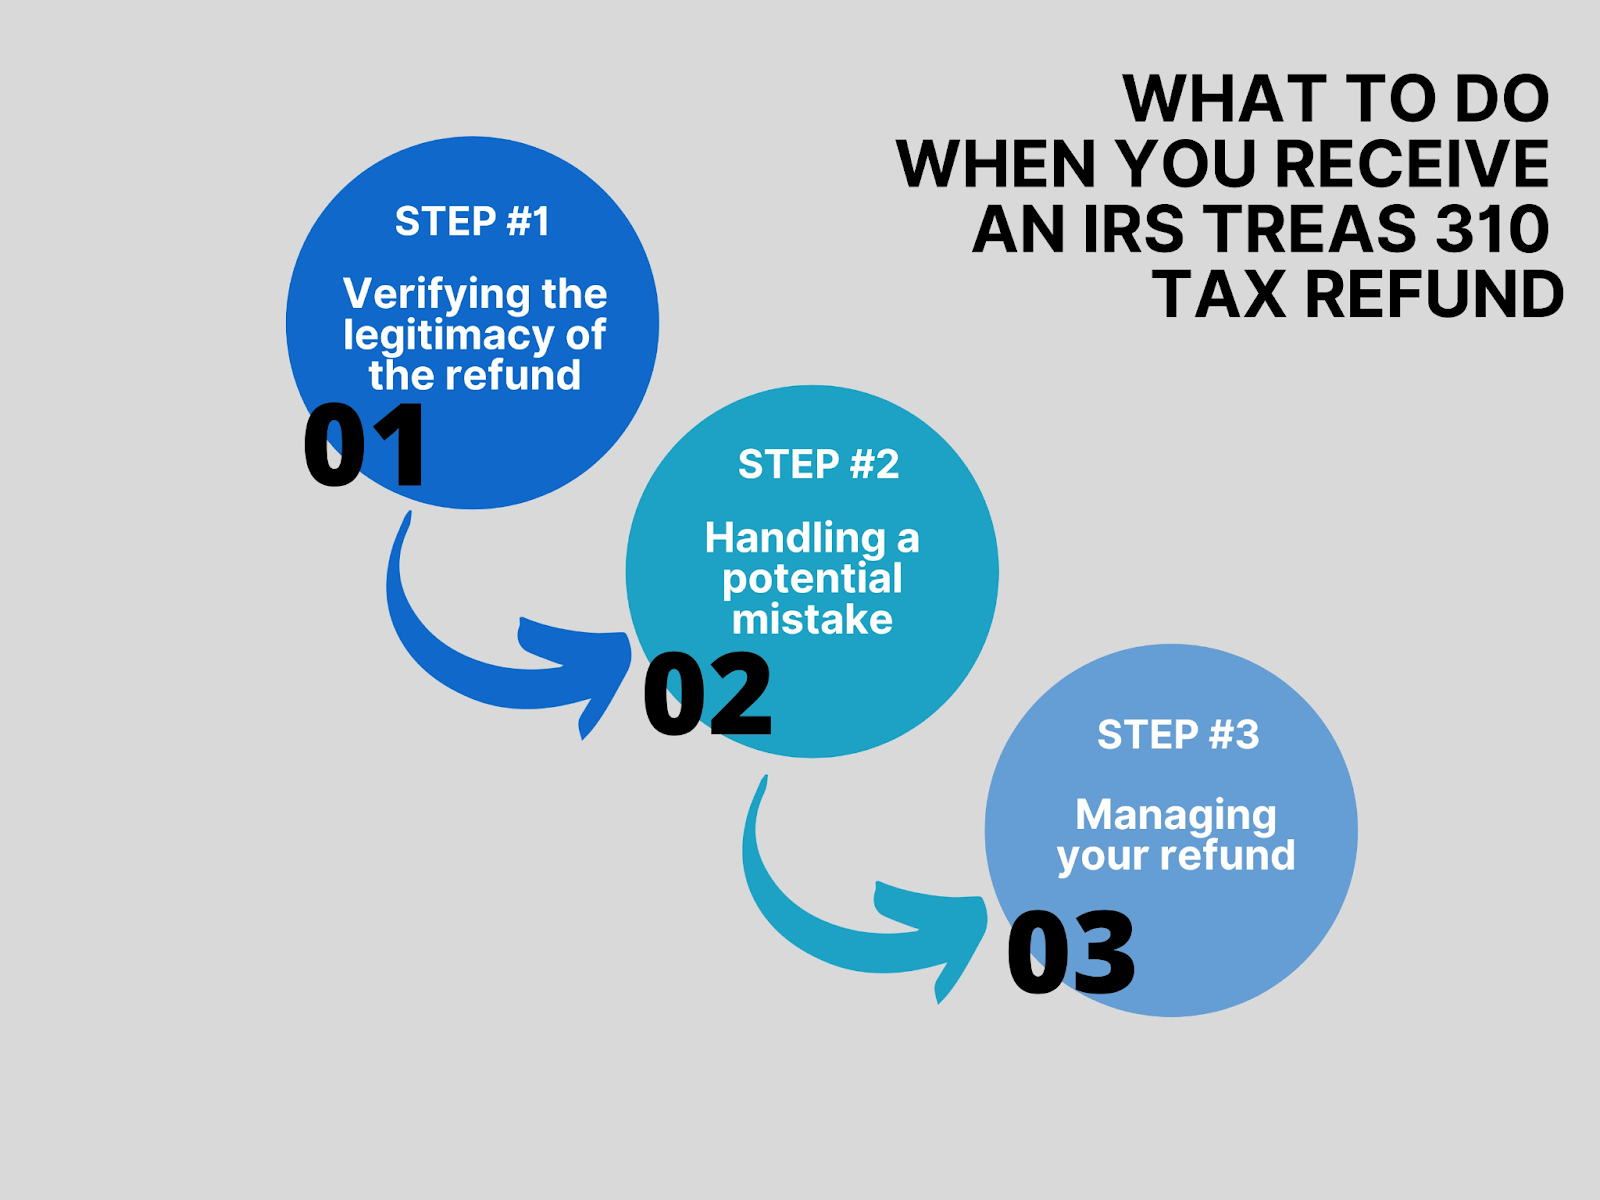 What to do when you receive an IRS Treas 310 tax refund